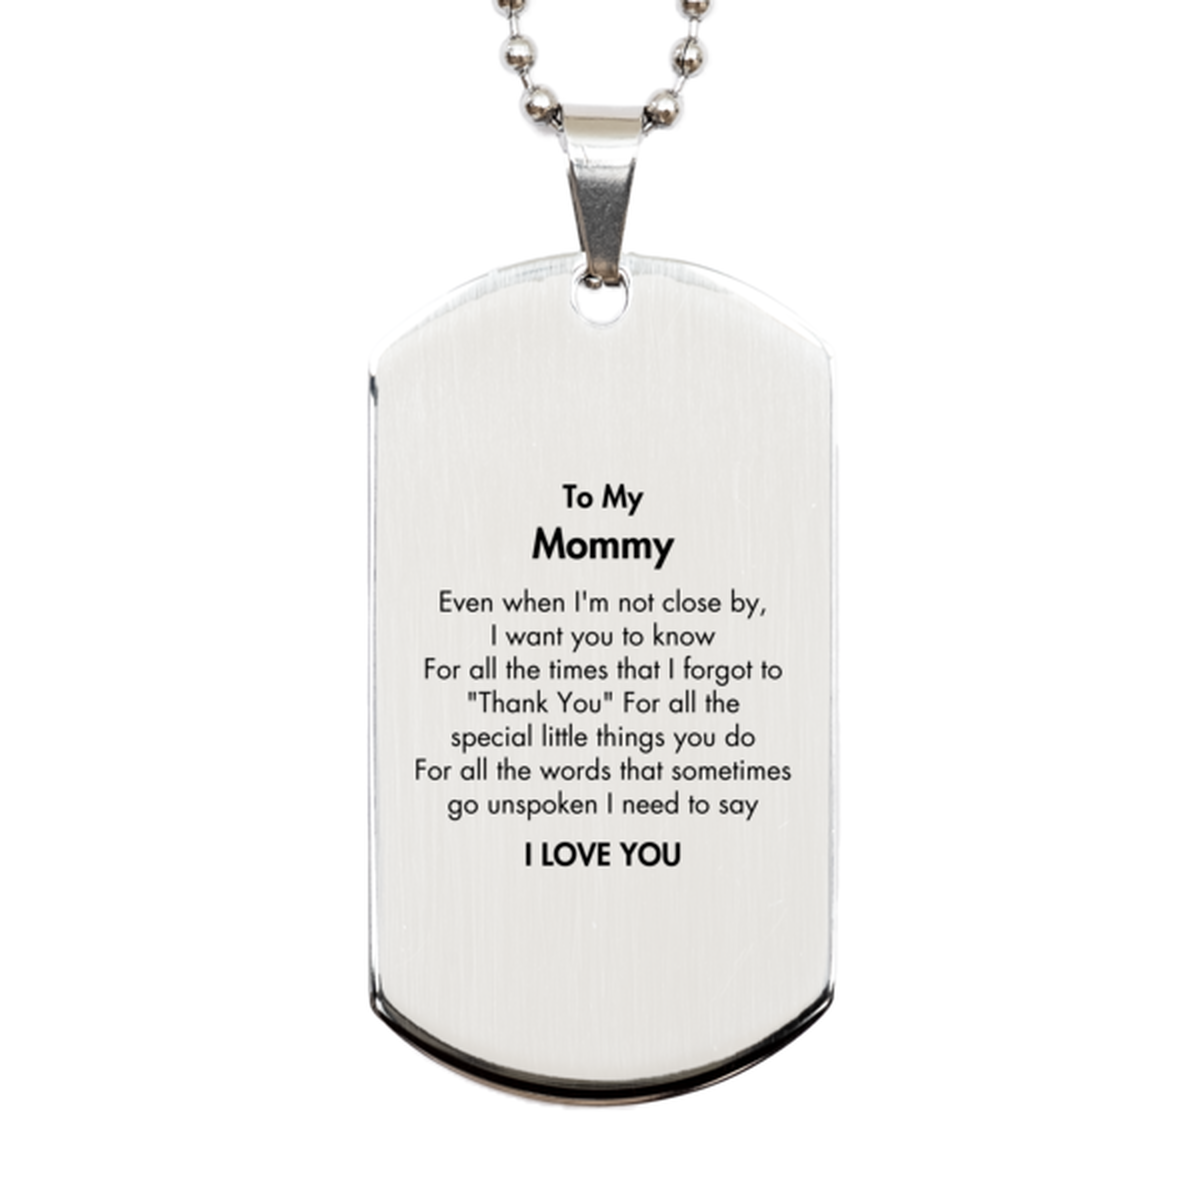 Thank You Gifts for Mommy, Keepsake Silver Dog Tag Gifts for Mommy Birthday Mother's day Father's Day Mommy For all the words That sometimes go unspoken I need to say I LOVE YOU